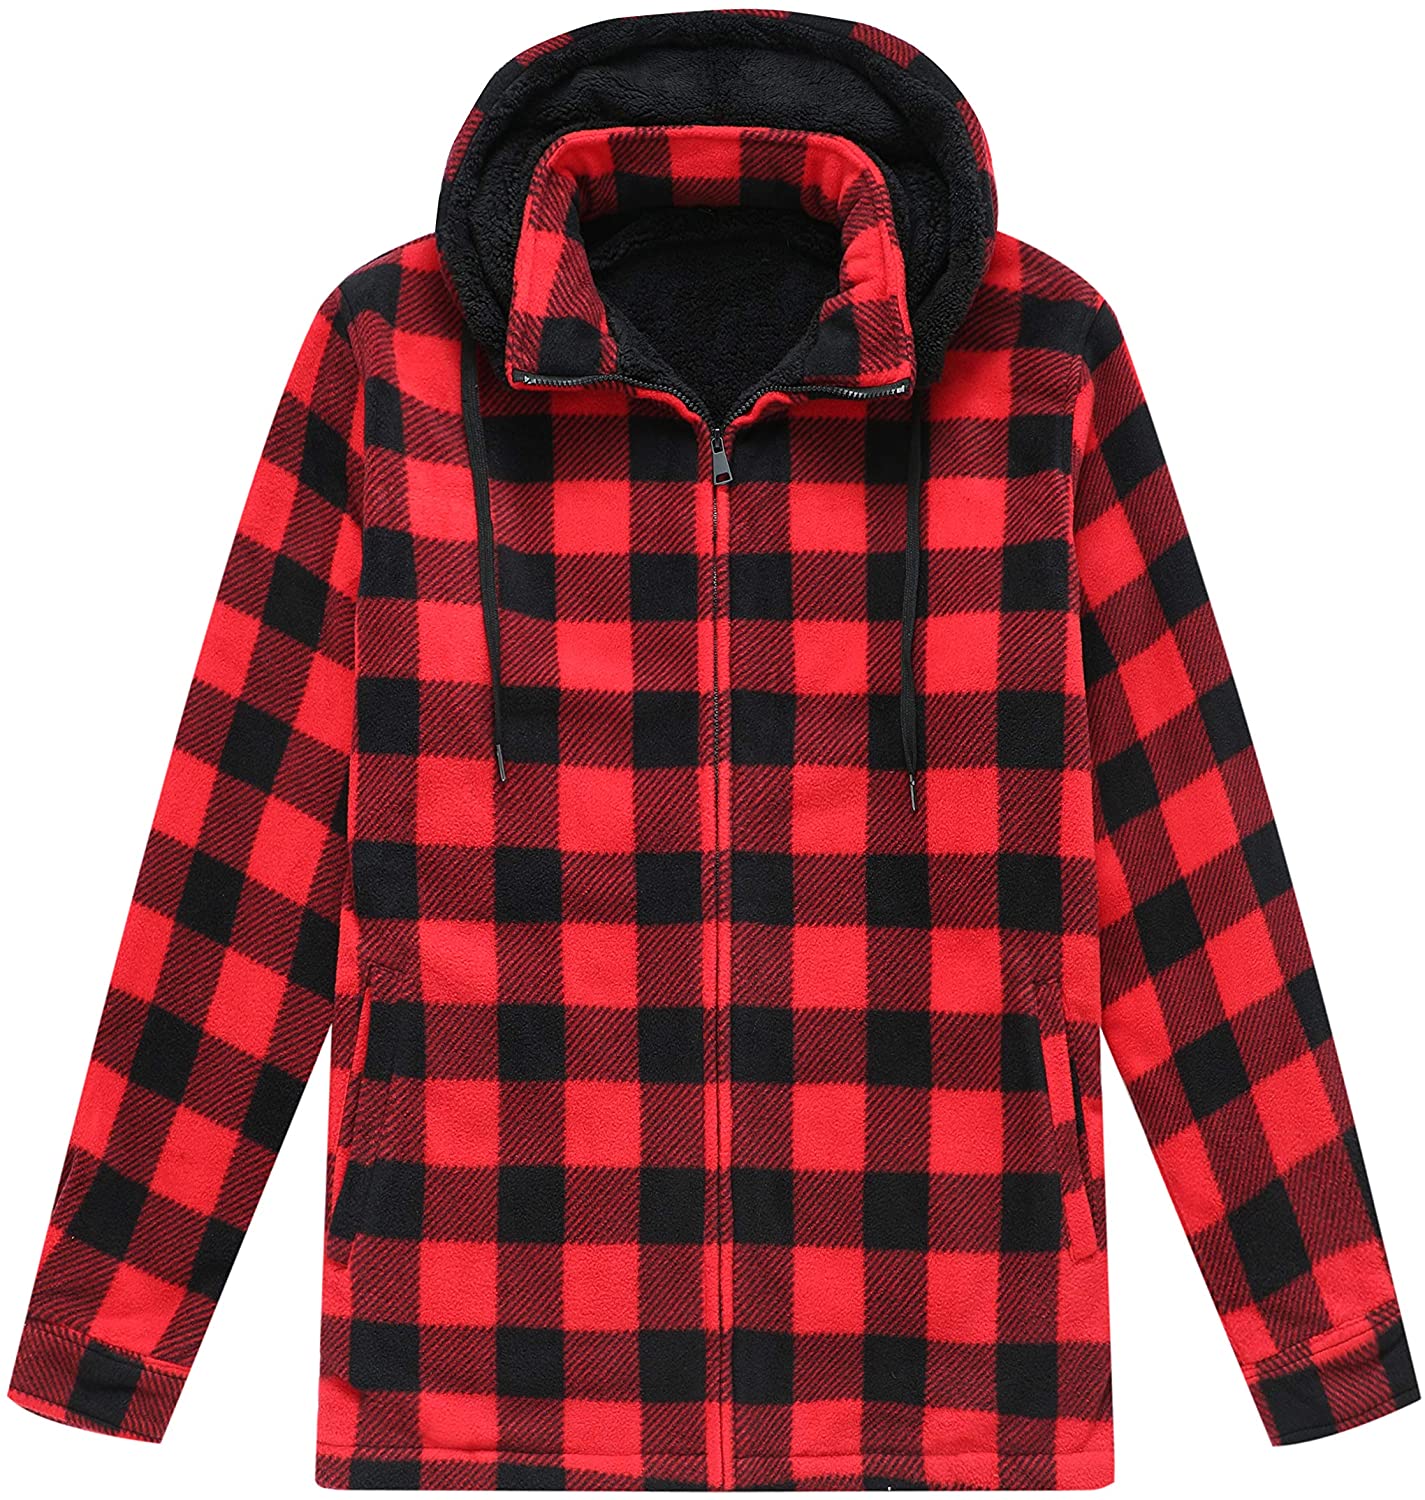 ZENTHACE Men's Sherpa Lined Fleece Flannel Plaid Shirt Jacket with  Removable Hoo